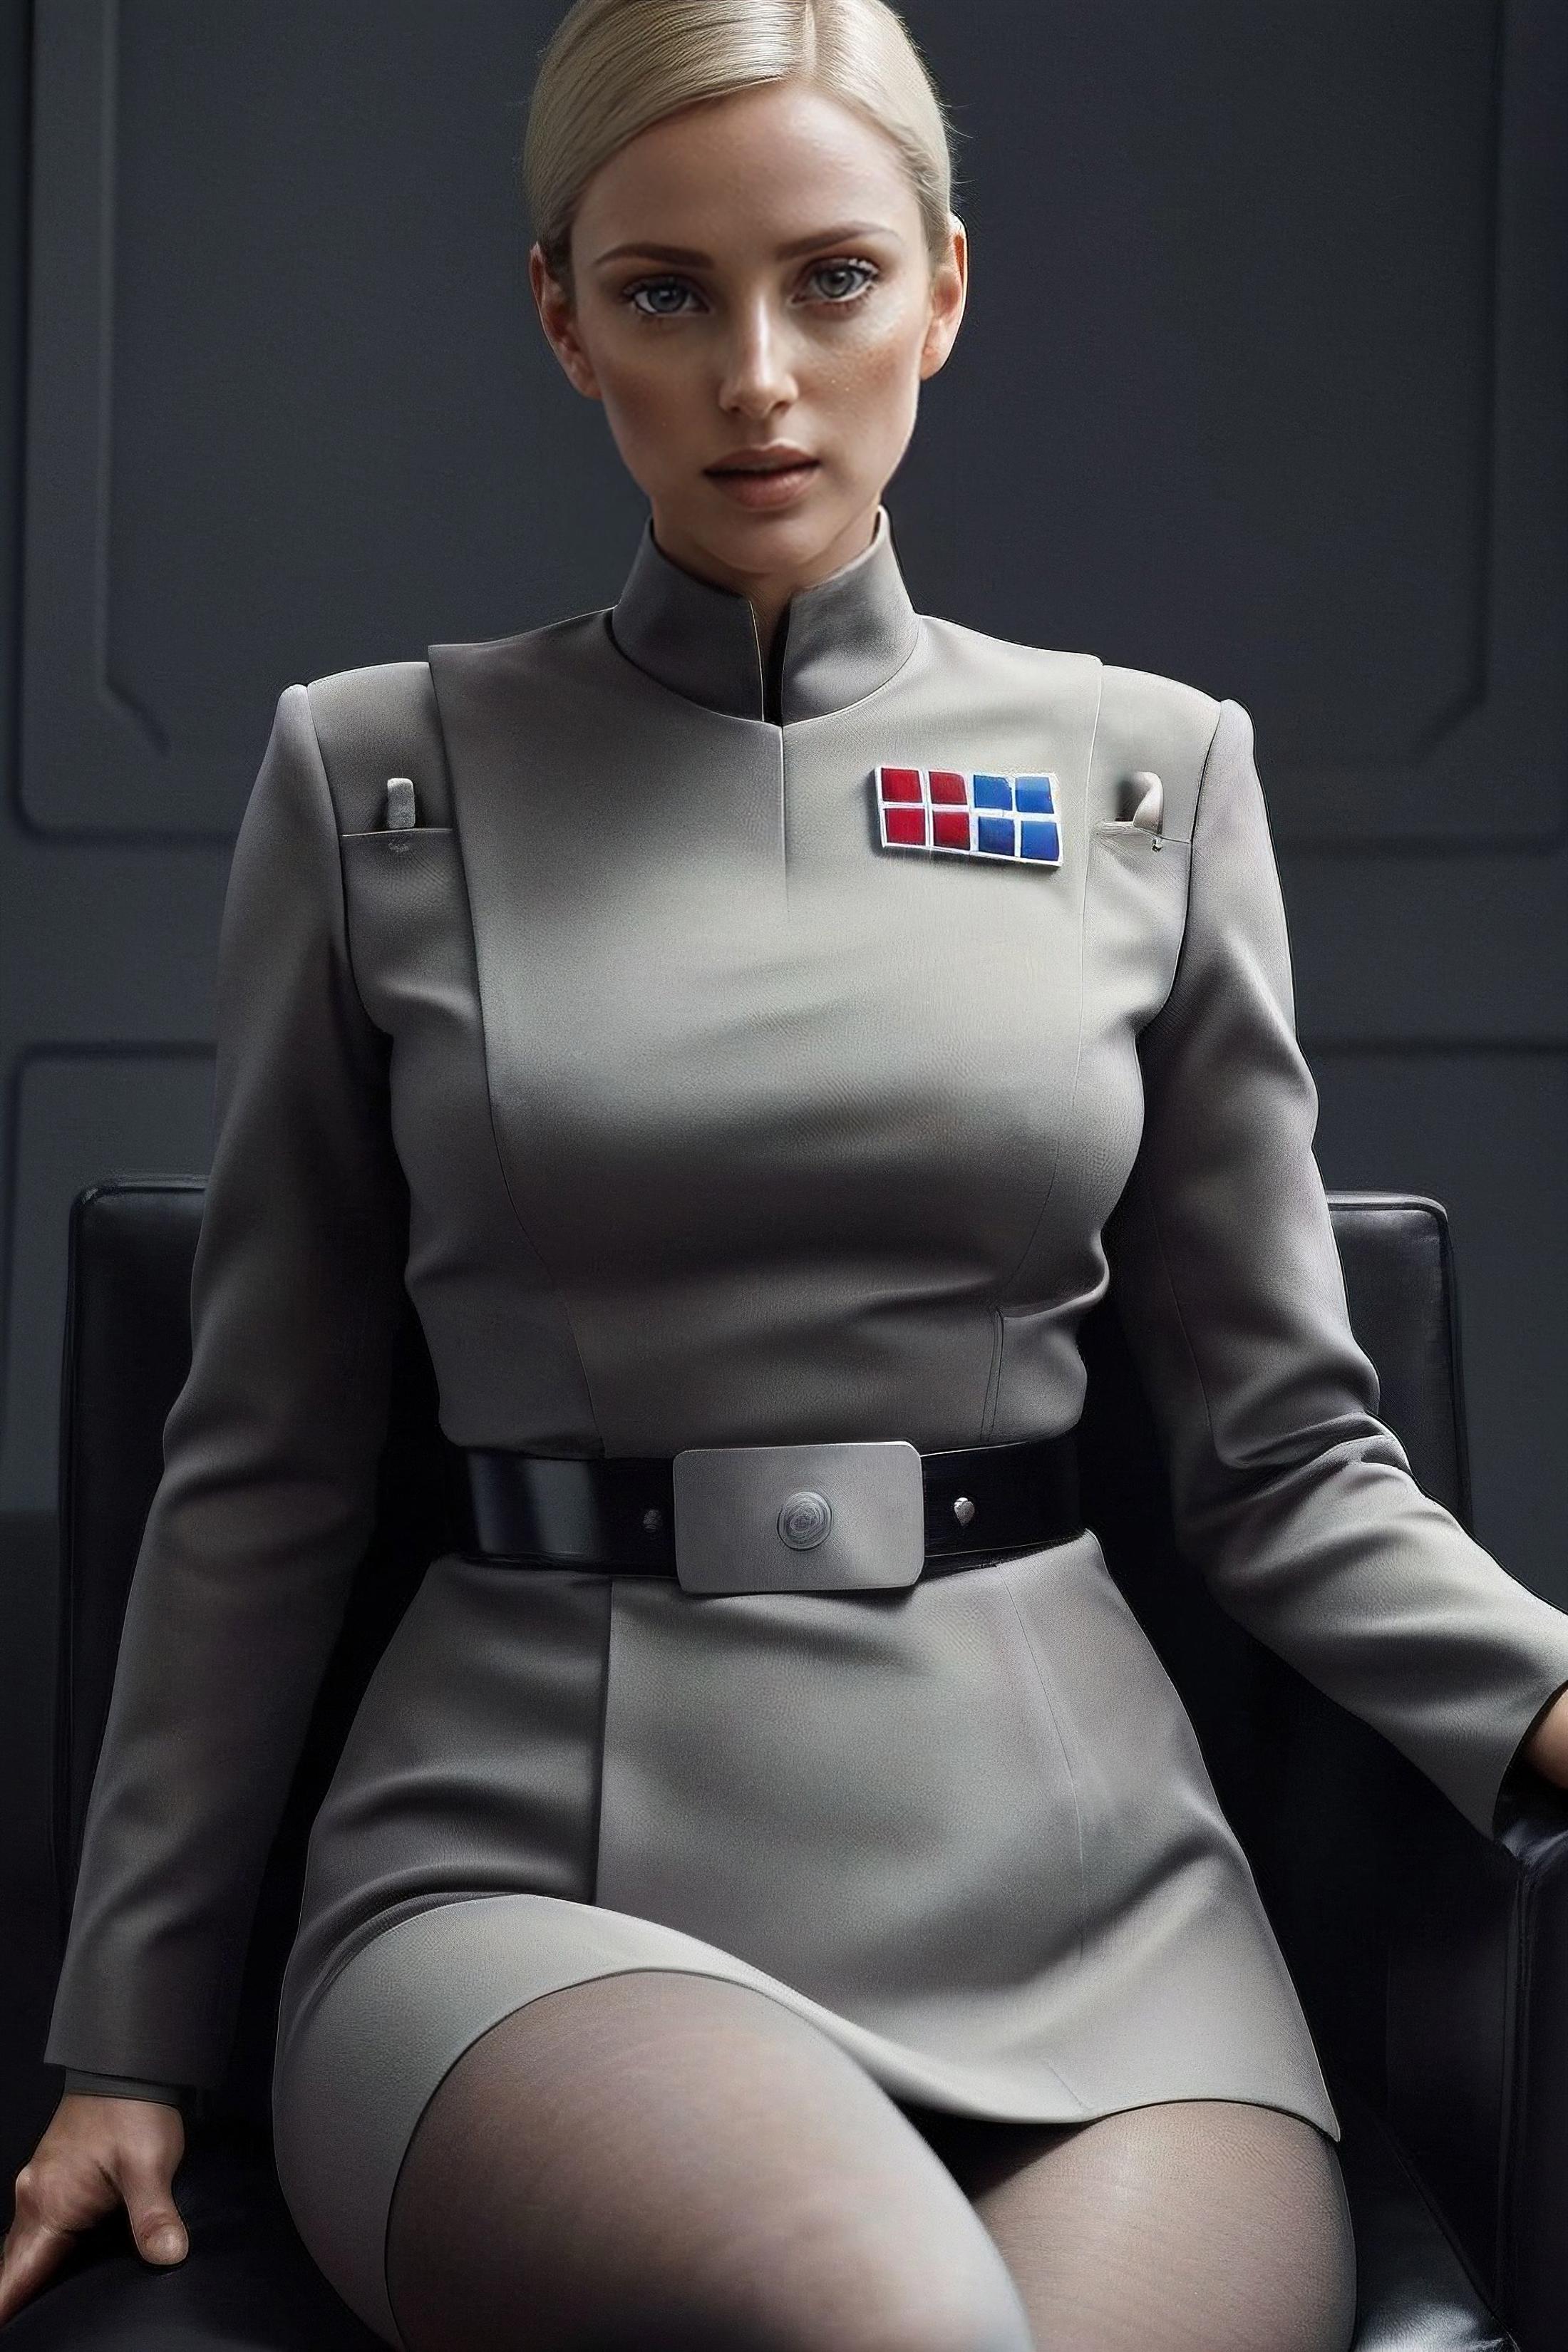 Star Wars imperial officer uniform image by tonyunreal